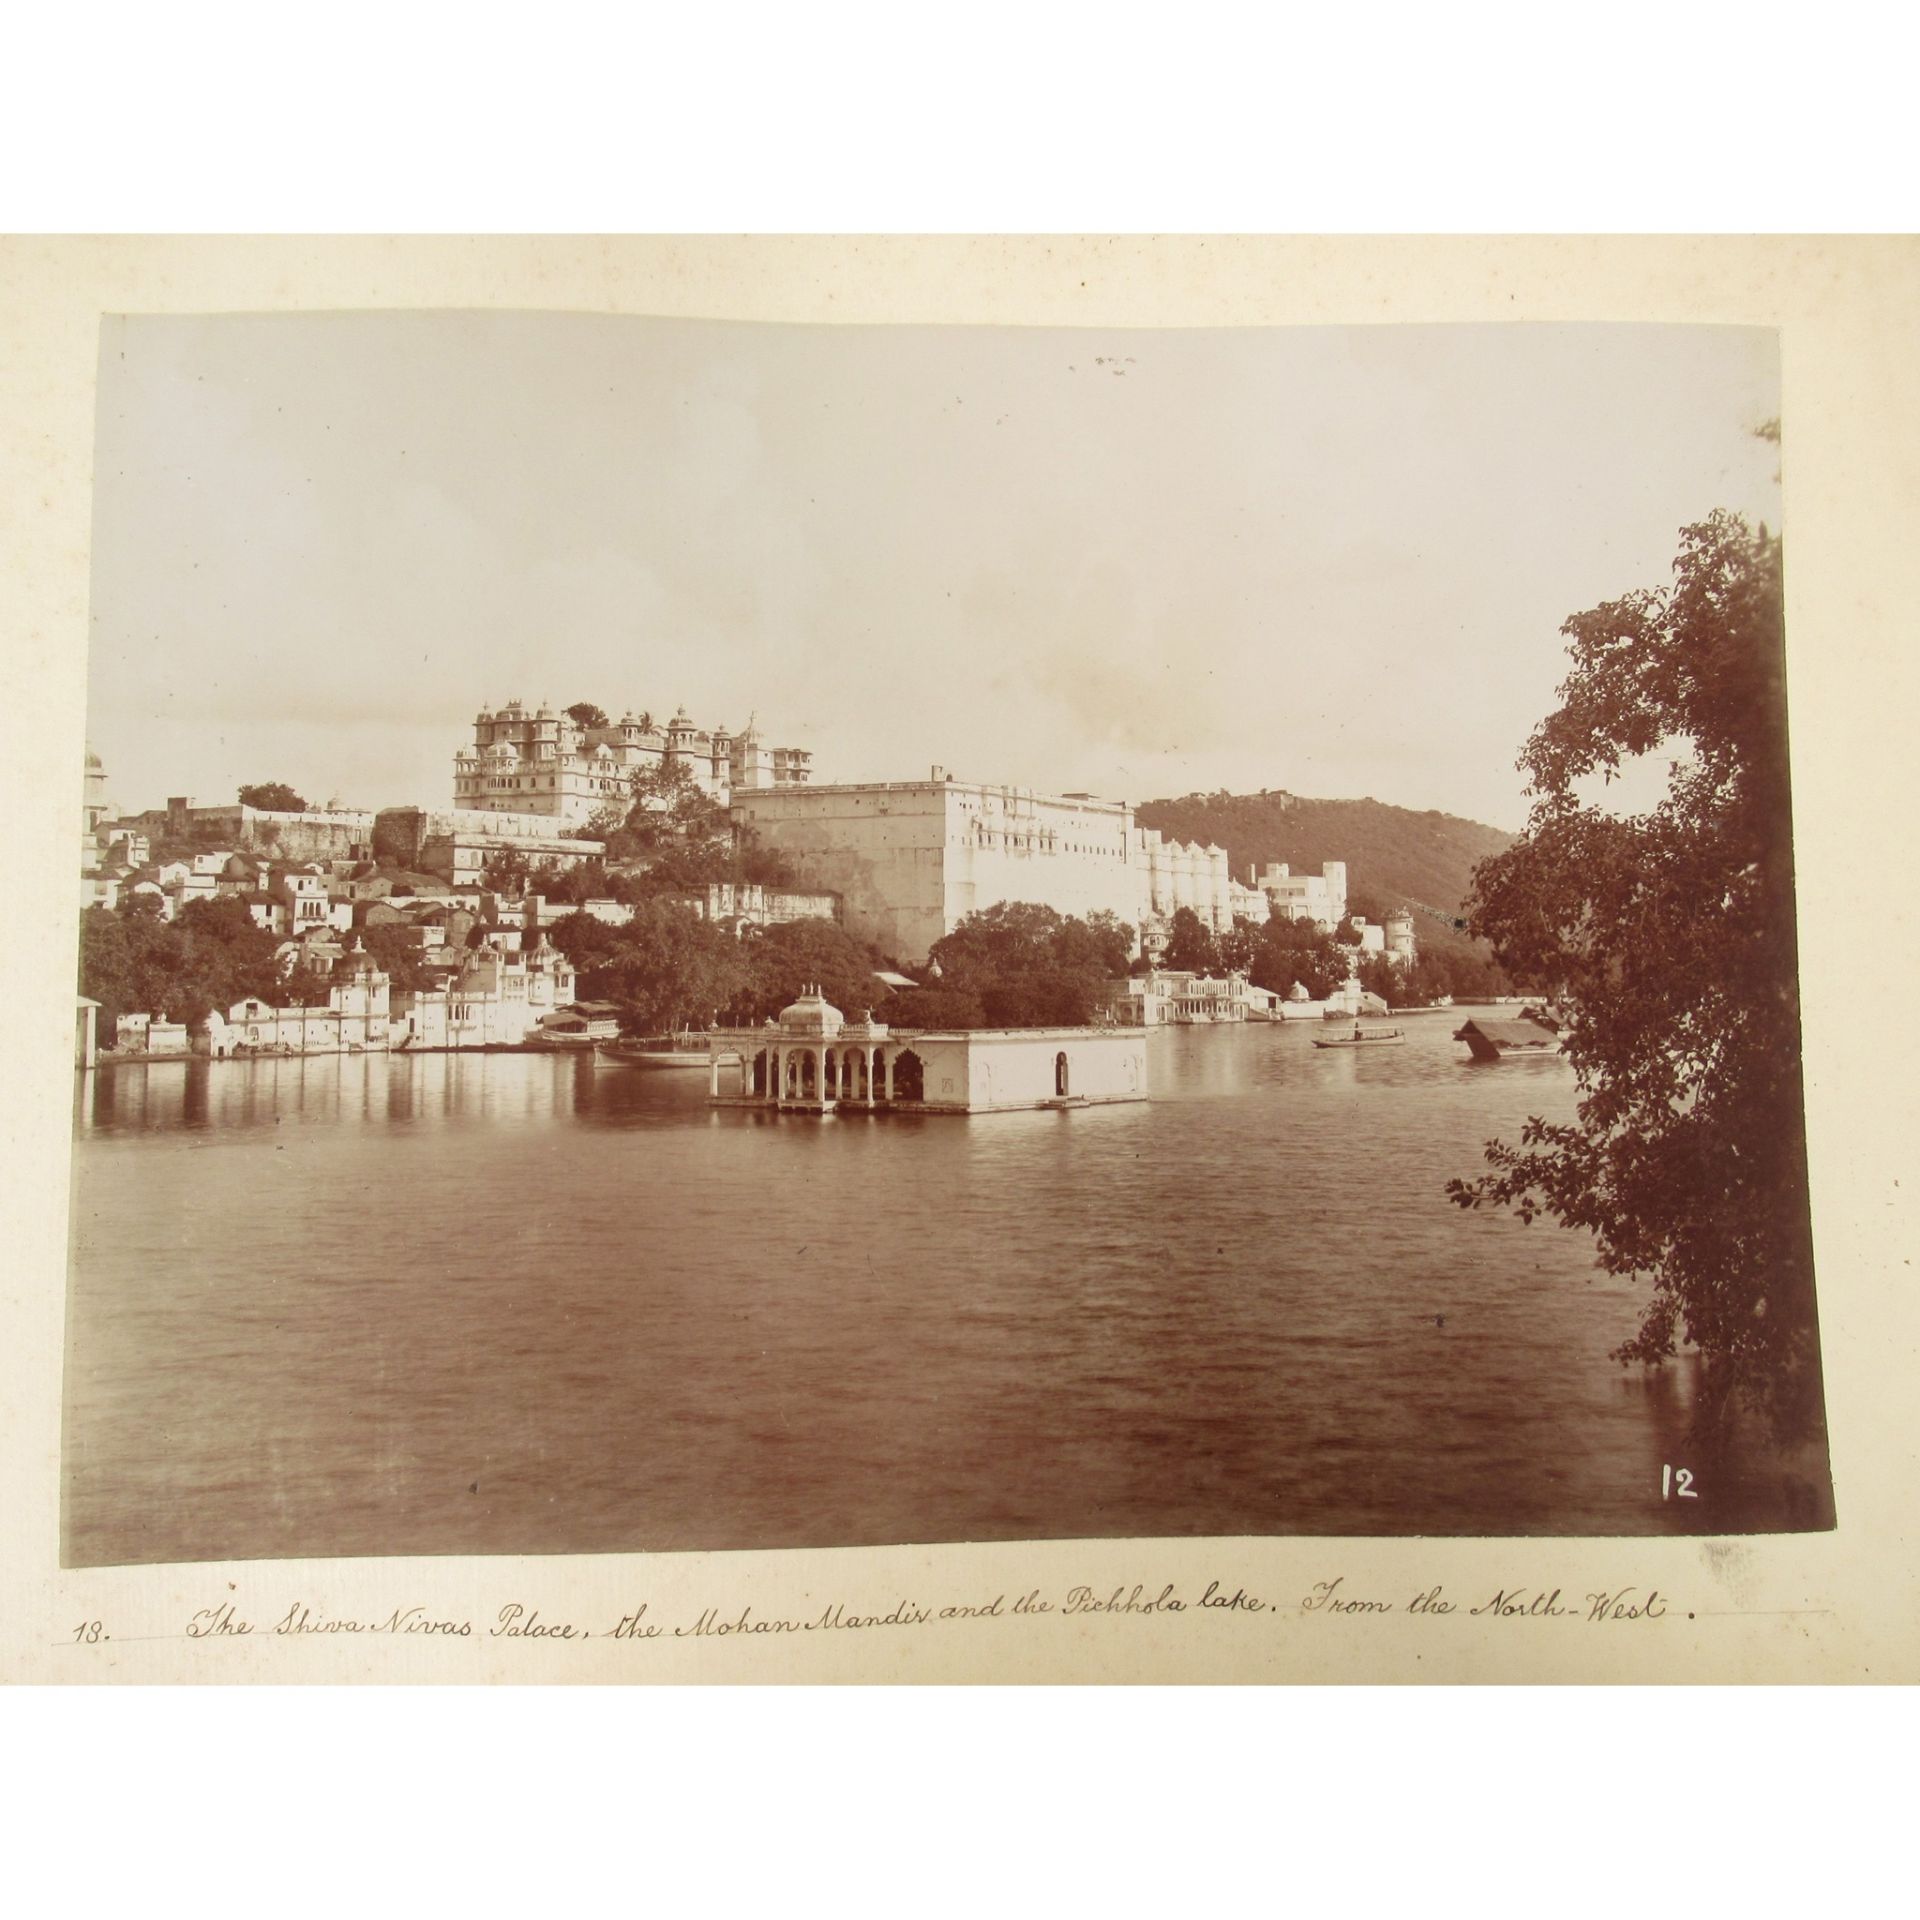 India: a photograph album Photographs of Rajasthan by Mohan Lal of Udaipur, late 19th century - Image 13 of 23